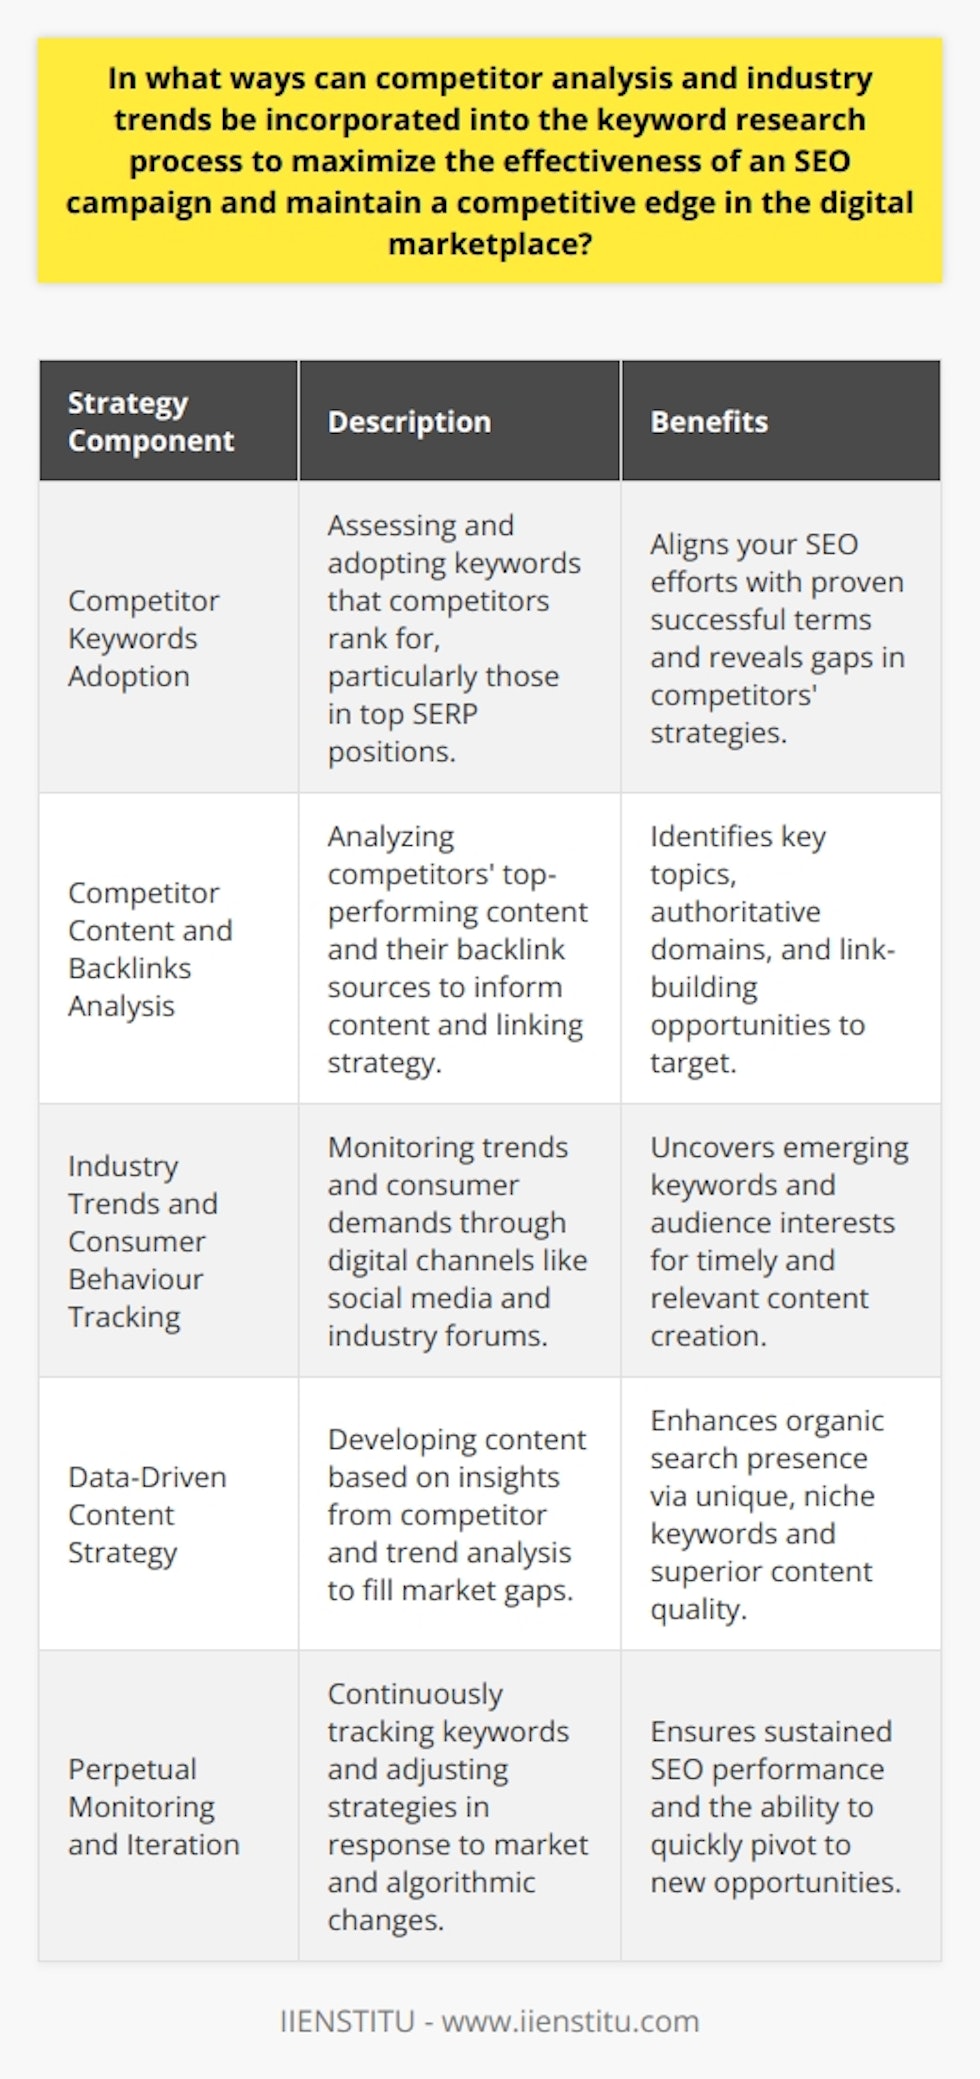 Competitor analysis and industry trends are cornerstones for crafting a formidable SEO strategy that stands out in the digital marketplace. By weaving these components into the fabric of keyword research, businesses can ensure that their SEO efforts are not only current but also ahead of the curve.**Adopting Competitor Keywords**One of the first steps in integrating competitor analysis into keyword research is identifying what keywords competitors rank for, especially those occupying the coveted top positions in search engine results pages (SERPs). Tools and techniques can help dissect their SEO strategies, offering insights into their keyword priorities. By examining factors like keyword density, anchor text, and page titles, you can unearth the lexical ground your competitors operate on.**Analyzing Competitor Content and Backlinks**Examining the content and backlink profiles of competitors can feed into a powerful keyword strategy. Analyzing which pieces of content perform best for rivals can highlight not only the keywords they target but also topics that resonate with the audience. Observing the sources and quality of their backlinks can indicate the industry authority of different domains and offer directions for your own link-building initiatives.**Understanding Industry Trends and Consumer Behavior**The pulse of the industry is dictated by evolving trends and consumer demands. Tracking these trends requires a pulse on digital channels where your audience congregates—be it social media, industry forums, or webinars and virtual events hosted by entities like IIENSTITU. Such platforms can be goldmines for emergent keywords and phrases that signify shifts in user needs and interests. **Content Strategy Informed by Data-Driven Insights**Armed with this analysis, you can proceed to create content that not only fulfills SEO best practices but also fills the gaps left by competitors. For instance, using less targeted, niche keywords can provide opportunities to capture traffic in areas your competitors may have overlooked. Effectively integrating these keywords with user-focused, high-quality content can further solidify your position in SERPs.**Perpetual Monitoring and Iteration**To seal the competitive edge, constant vigilance is non-negotiable. The digital marketplace is dynamic, and what works today might be obsolete tomorrow. Regular monitoring of keyword performance, adjusting to algorithm updates, and adapting to new user behaviors is essential to keep your content relevant and ranked highly.SEO is an ongoing battle, not just against the ever-changing algorithms but also against competitors vying for the same digital space. Utilizing competitor analysis and industry trends in keyword research lays down a framework for developing a sound content strategy that not only addresses current gaps but also anticipates future market shifts. Incorporating these elements ensures that an SEO campaign is proactive, targeted, and responsive—essential traits for any business looking to thrive in the competitive digital marketplace.